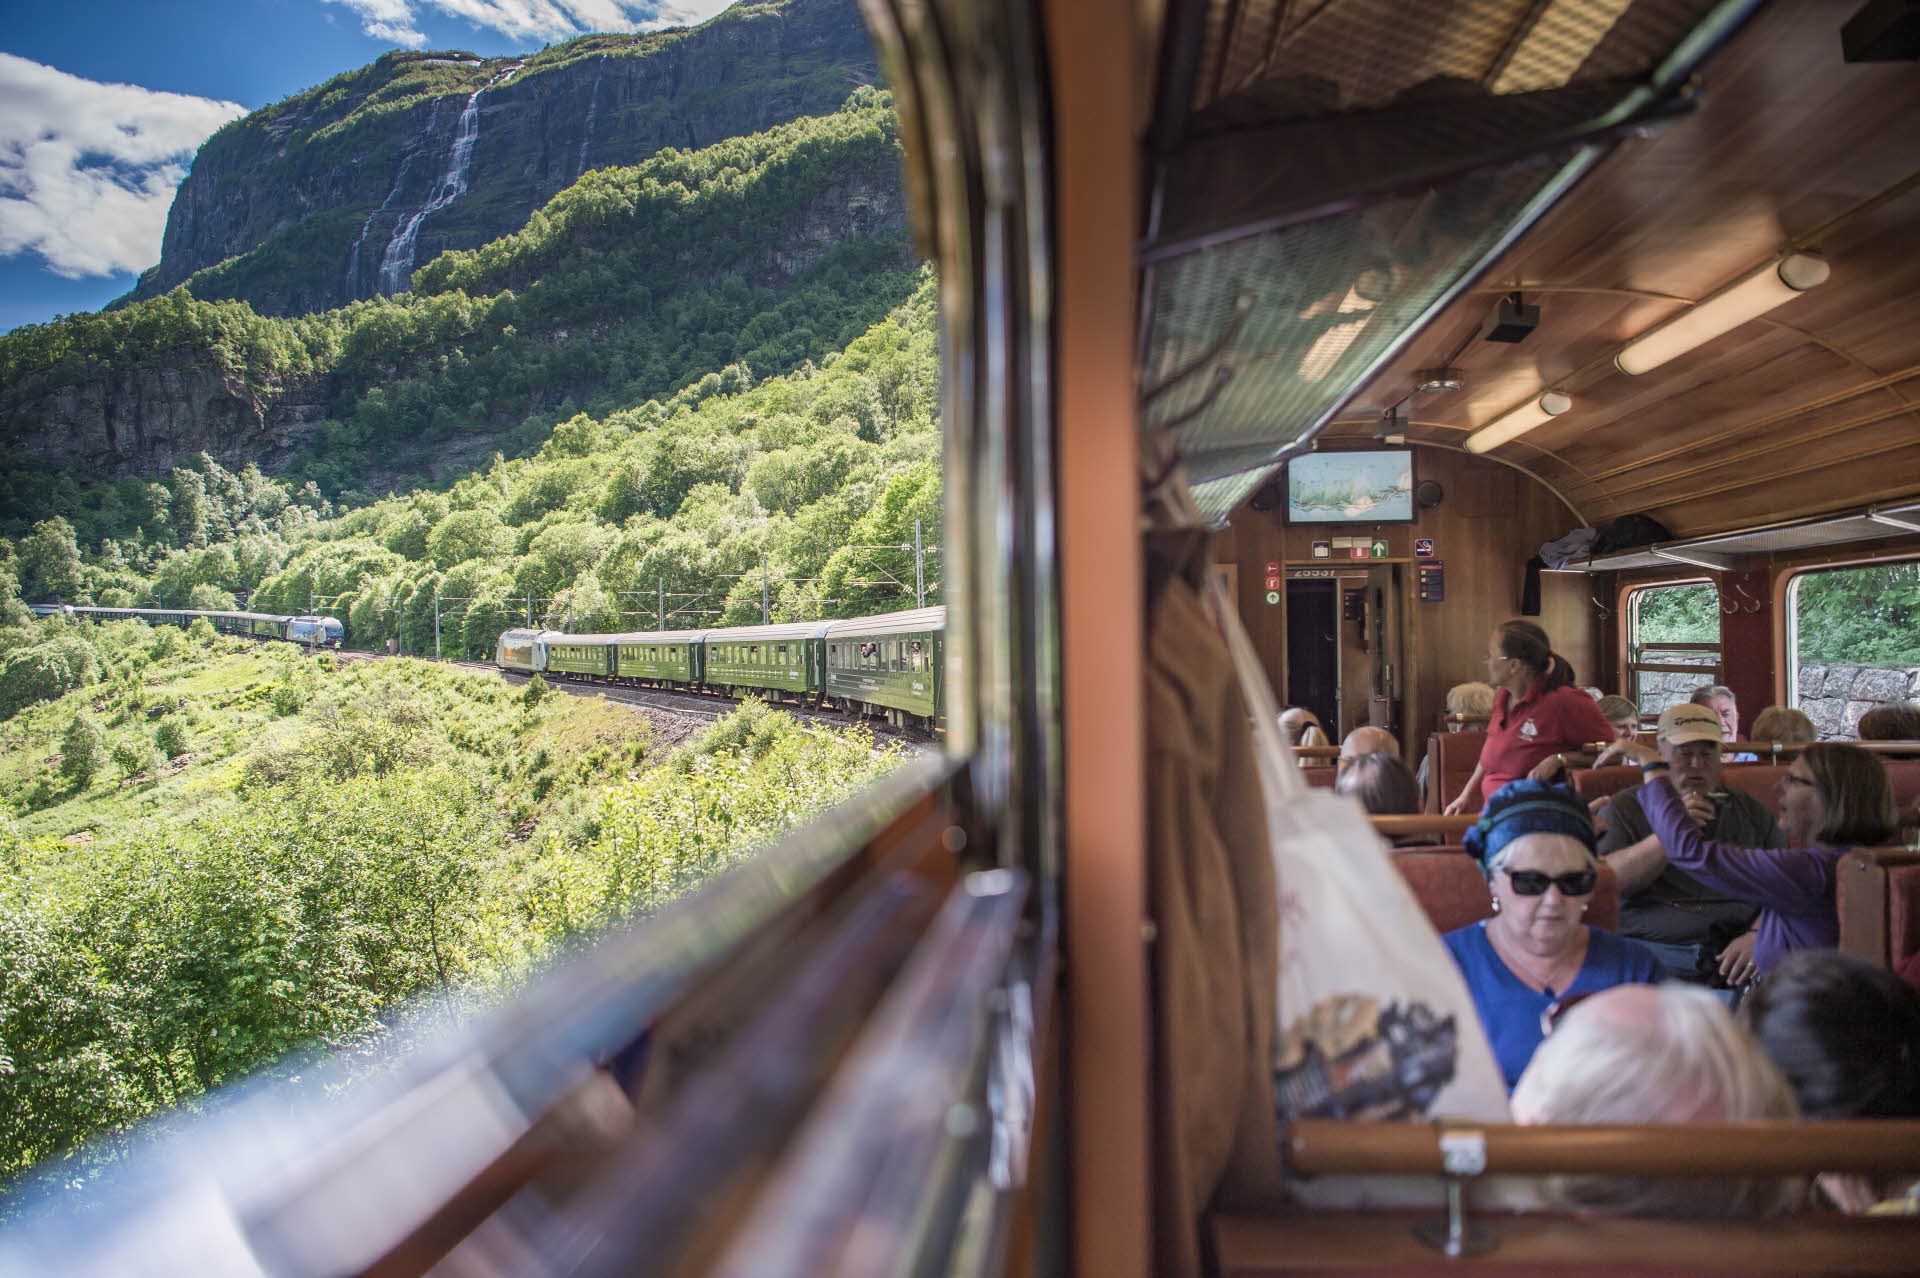 Two trains meet in Flåmsdalen – taken from a window on the Flåm Railway, with tourists in the carriage